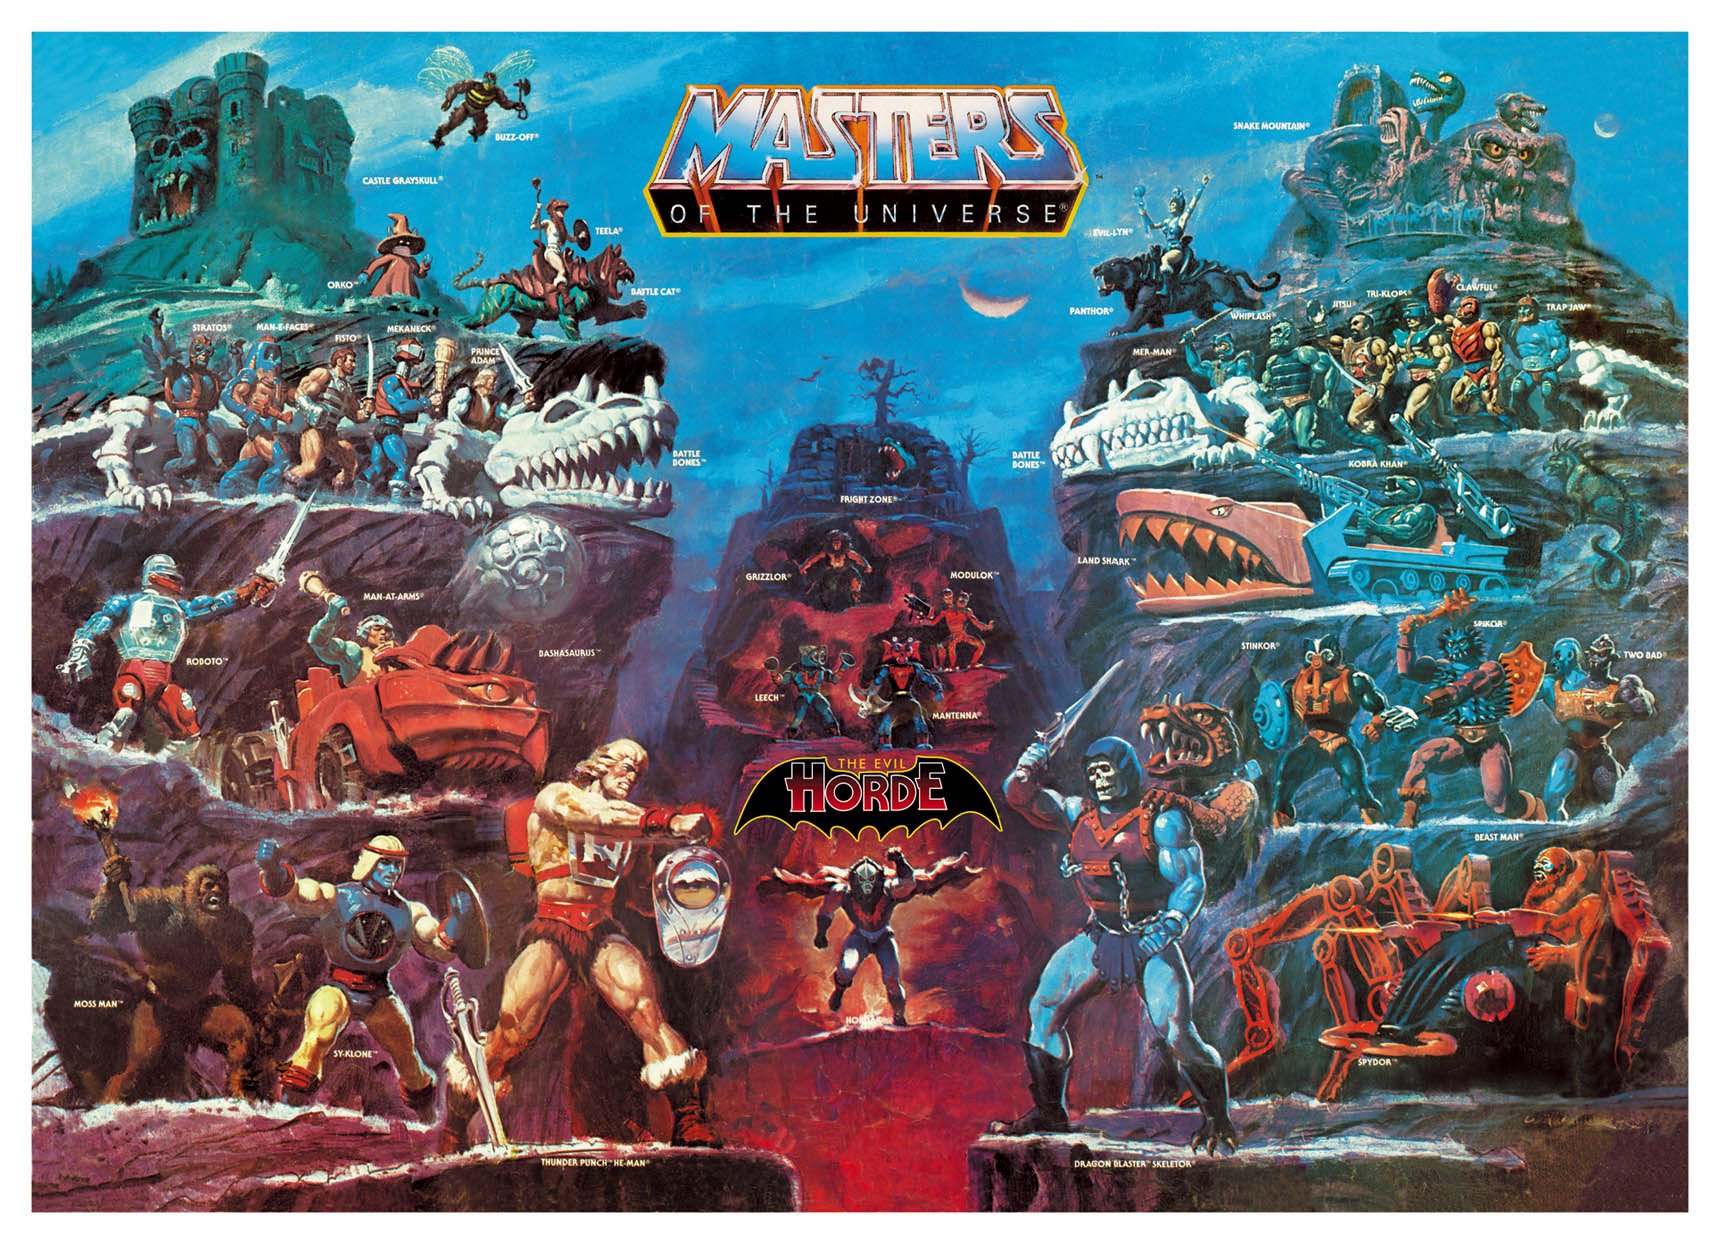 He Man Masters Of The Universe Poster - HD Wallpaper 